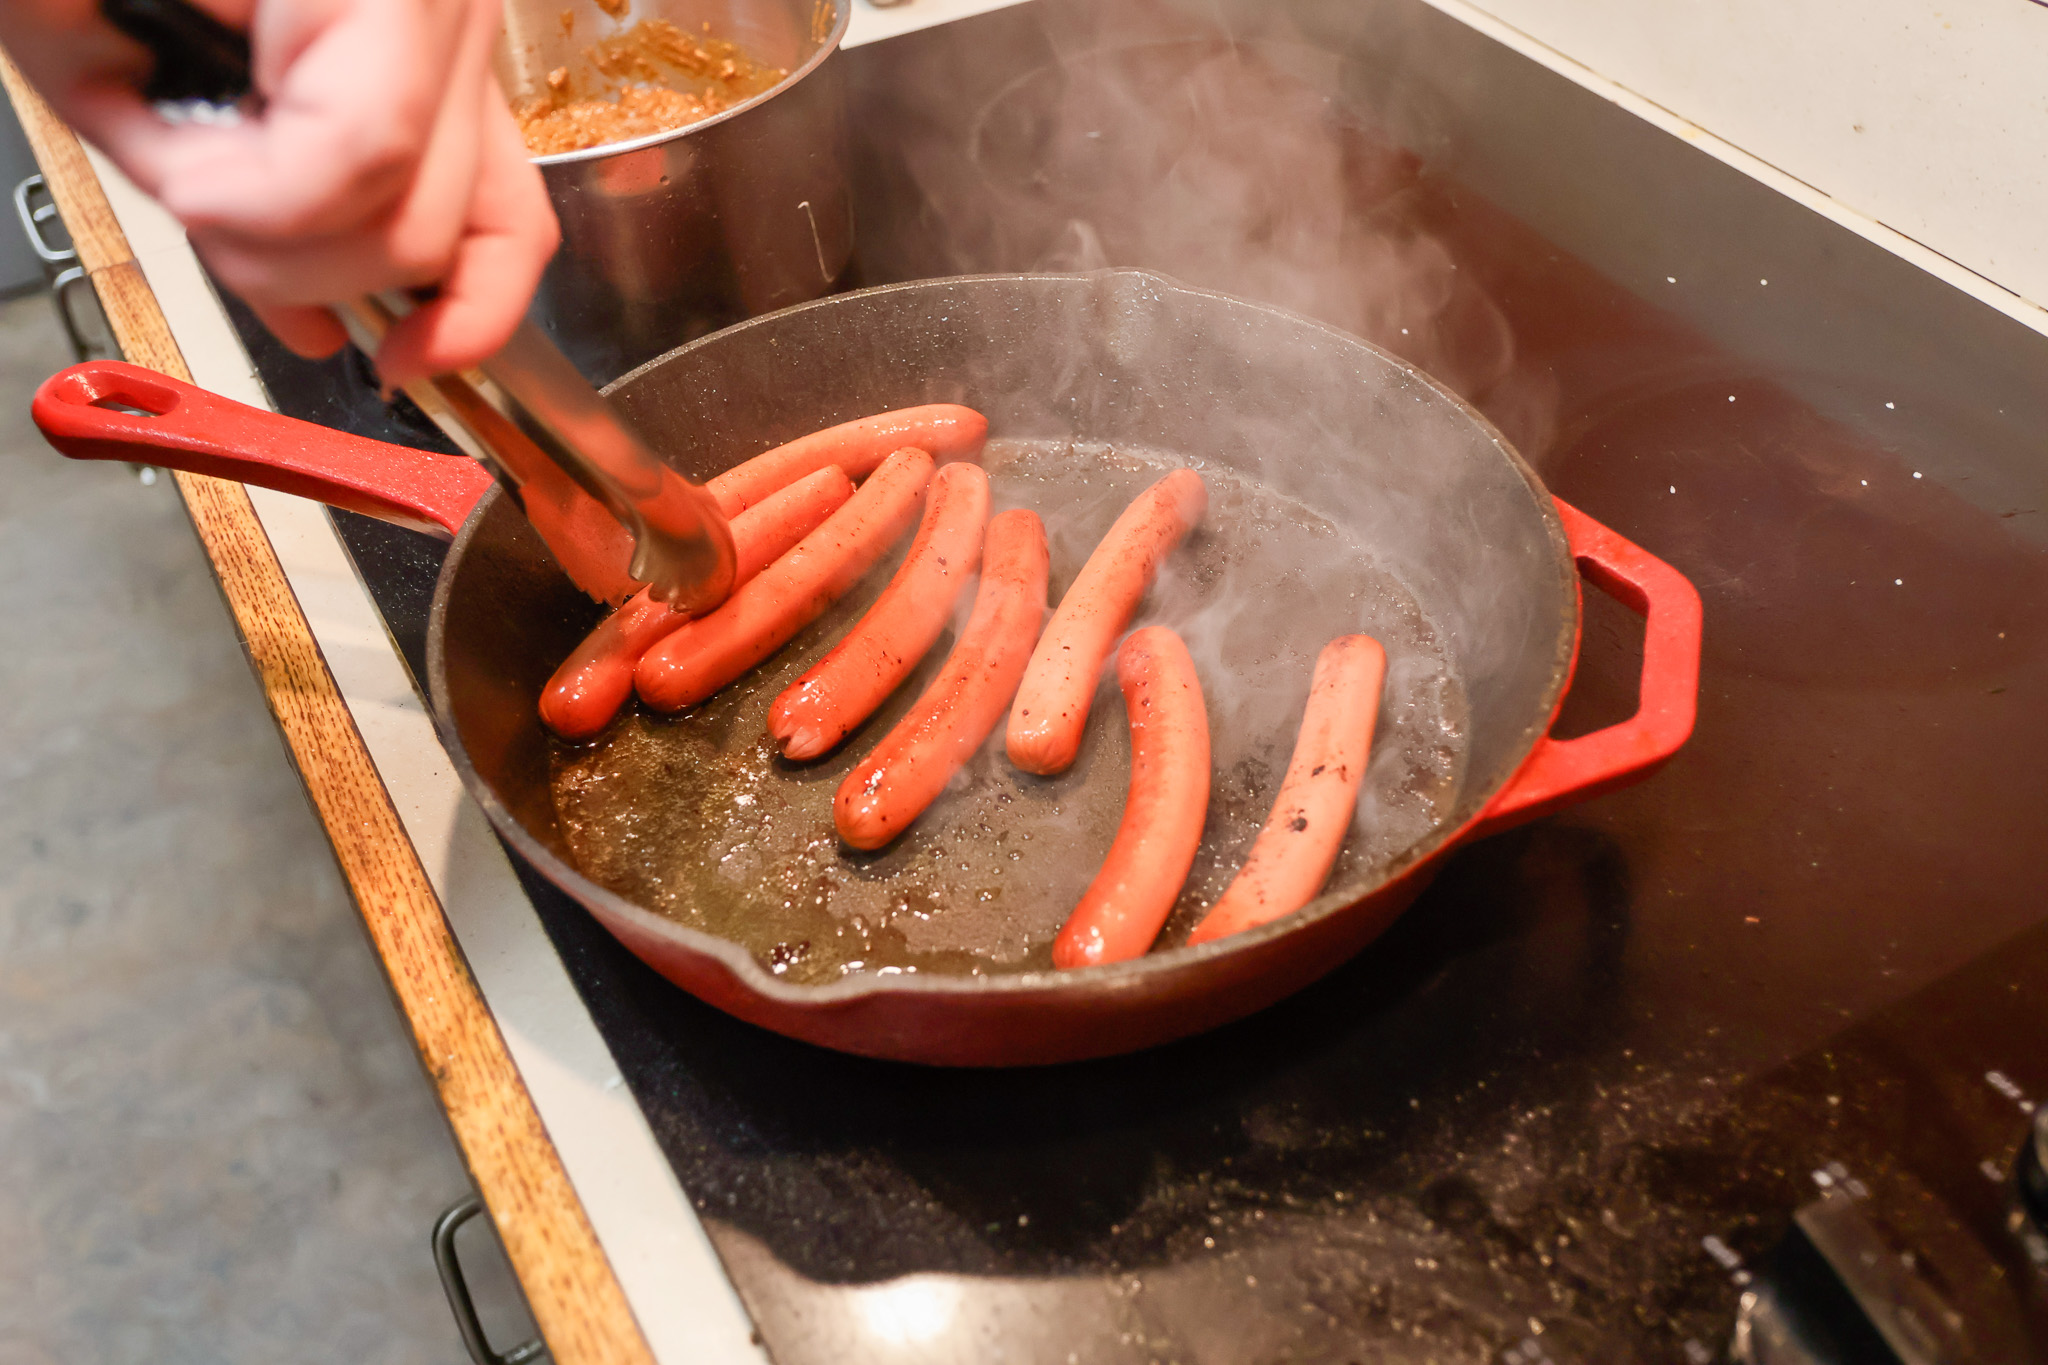 You can boil your hot dogs in a pinch, but cooking them in a pan tastes much better. 
Sal DiMaggio | The Montclarion